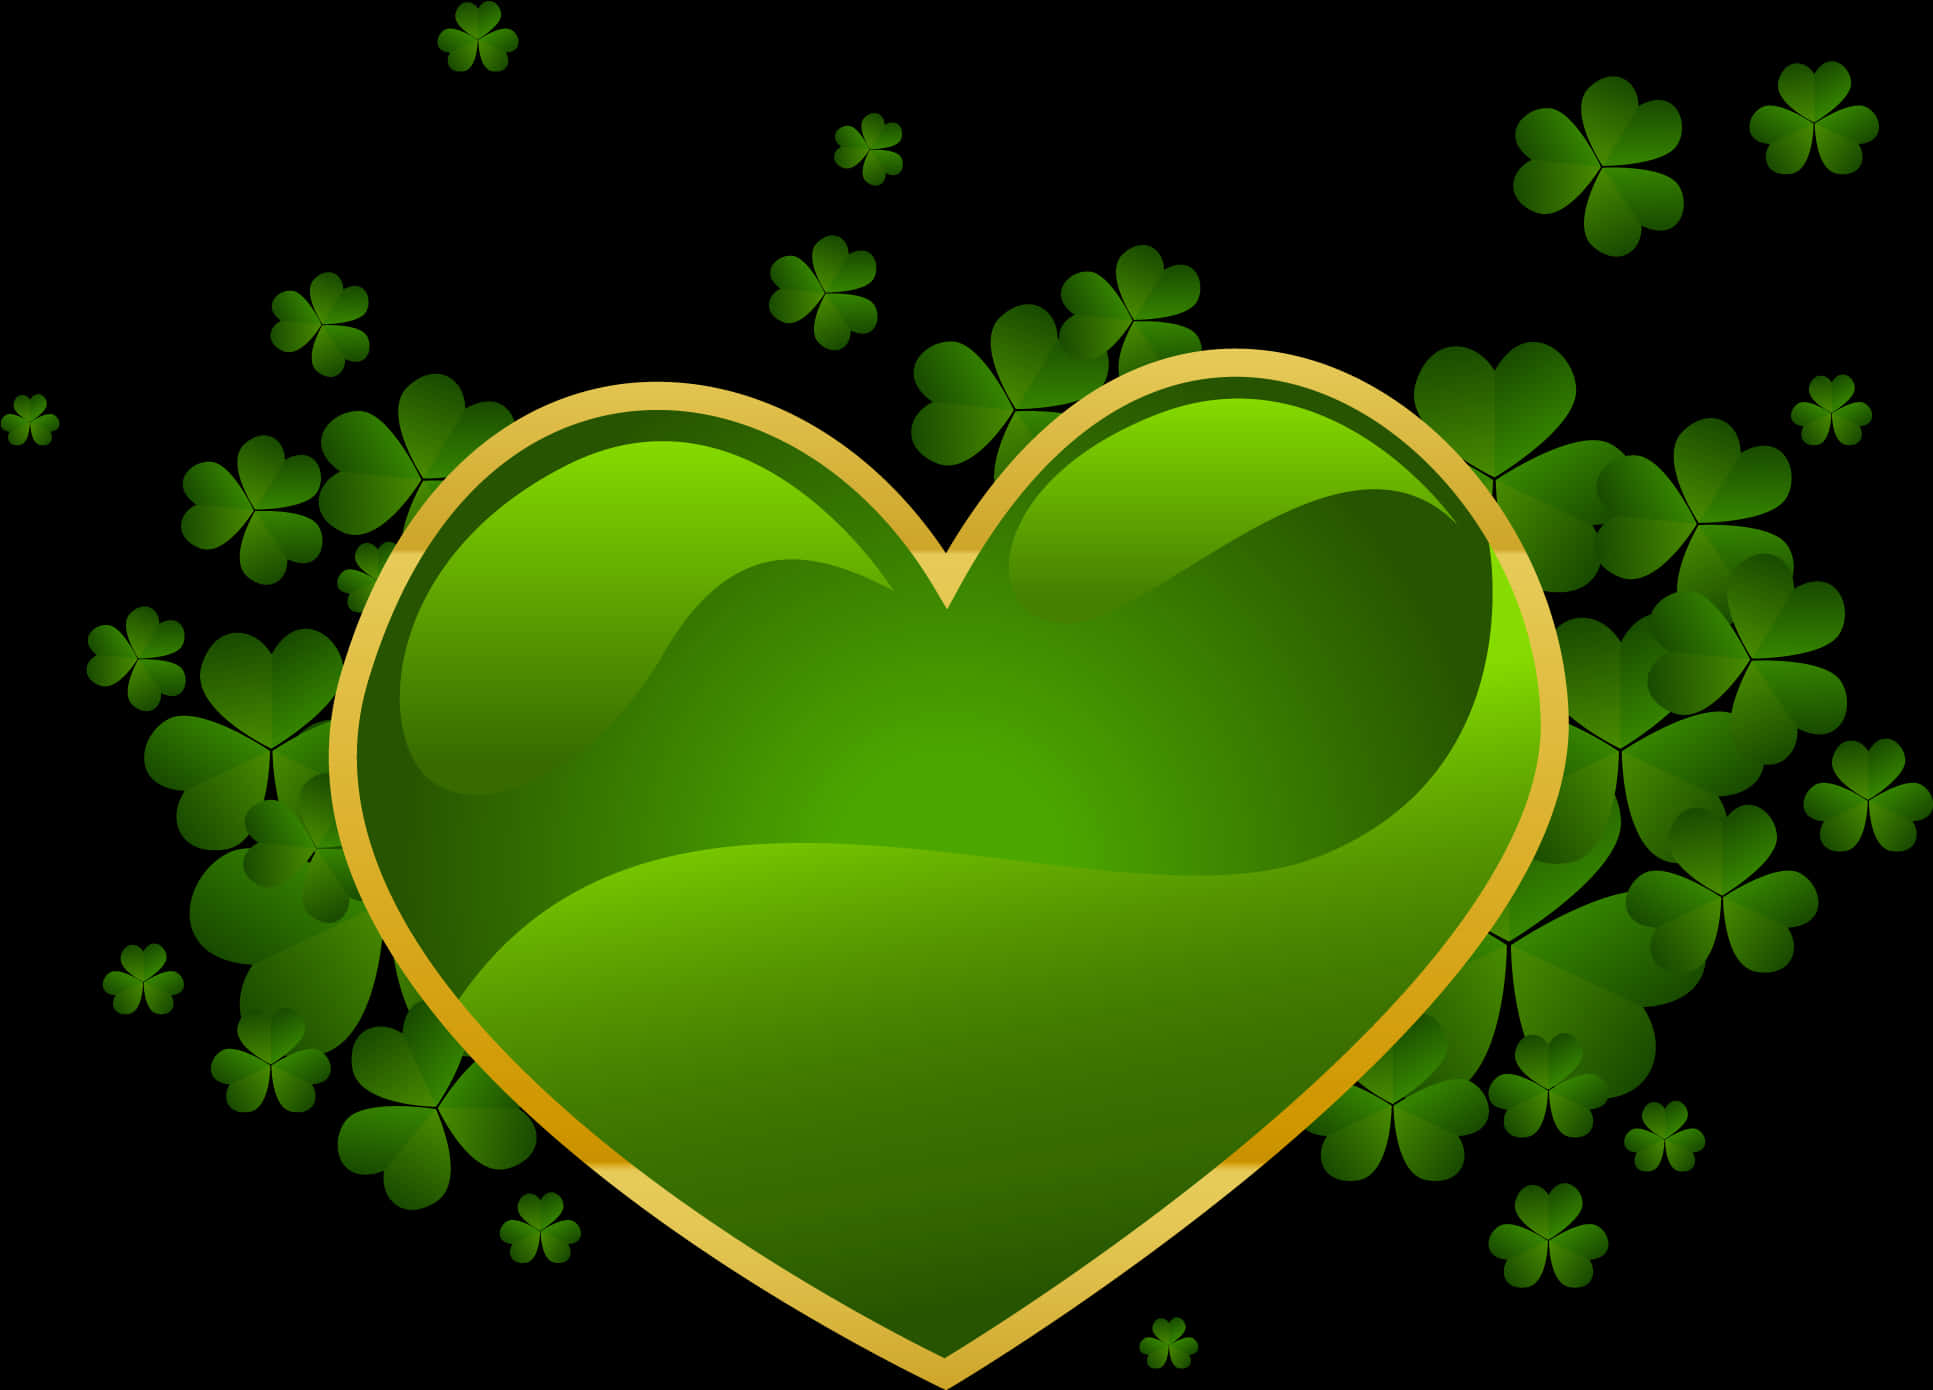 A Green Heart With Gold Border Surrounded By Clovers